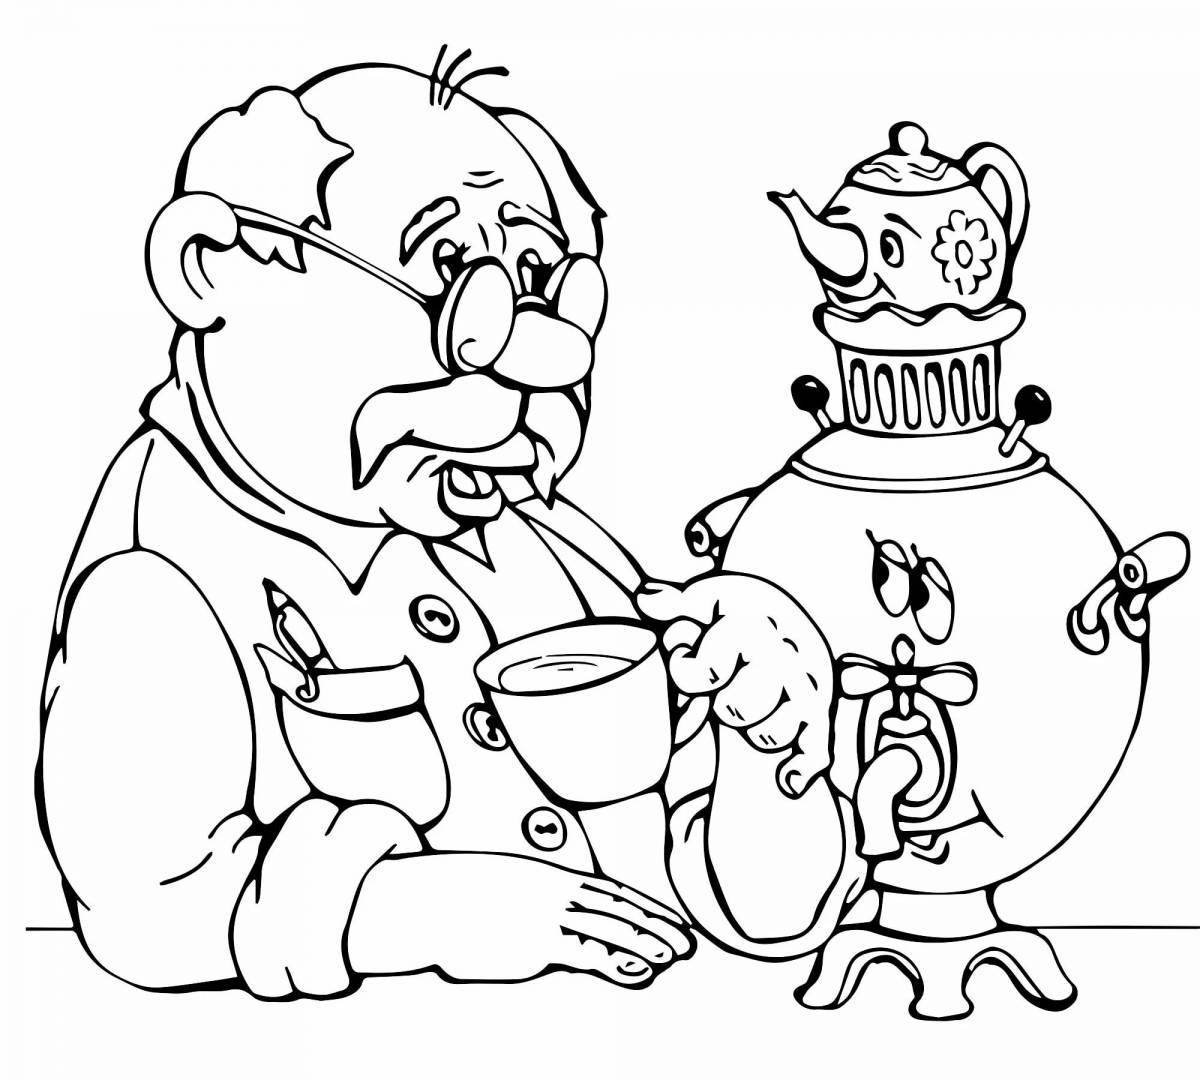 Whimsical grandfather coloring book for kids